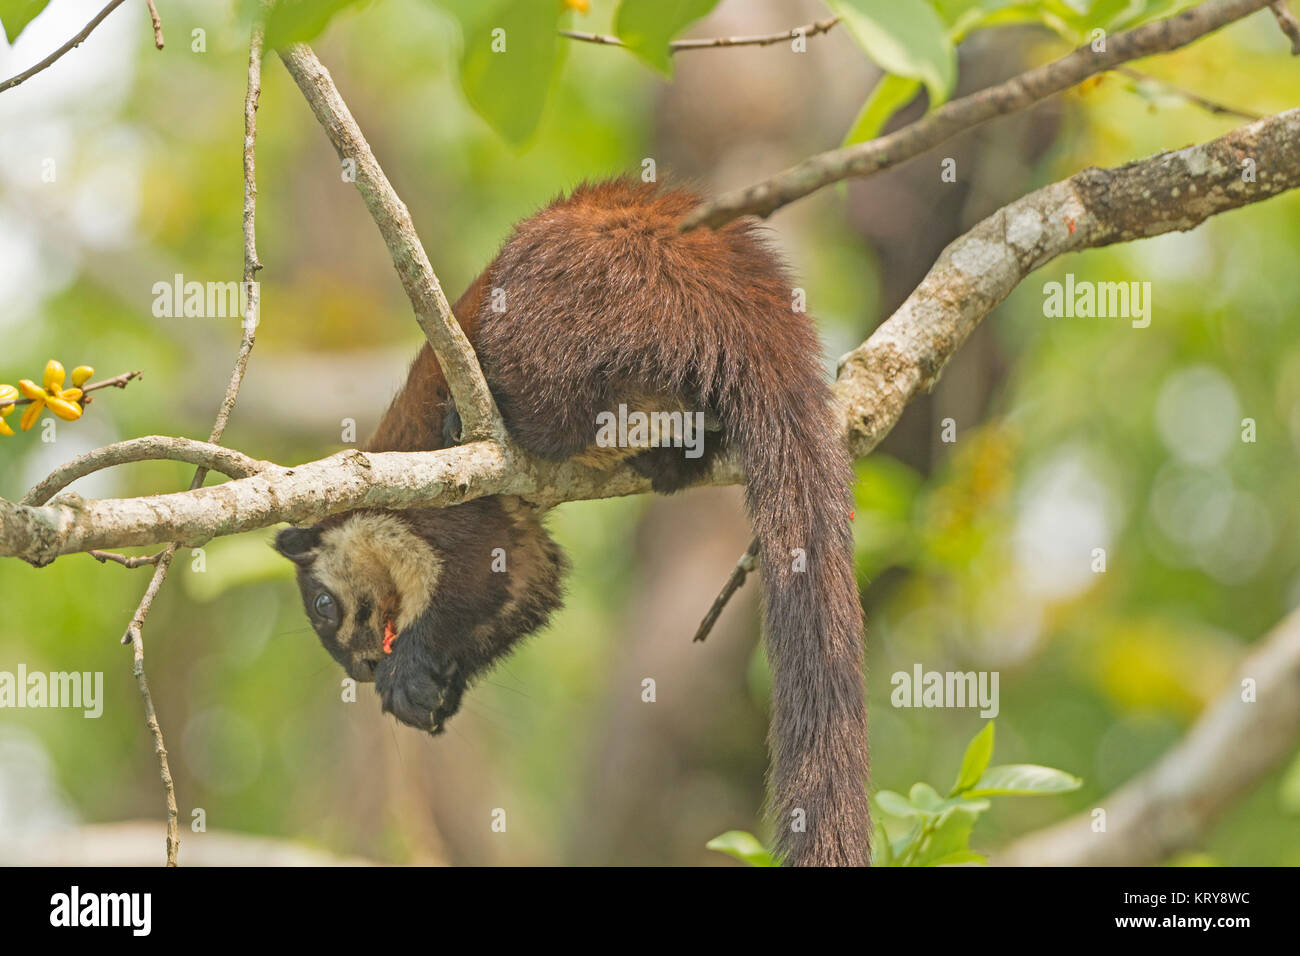 Black Giant Squirrel in a Tree Stock Photo